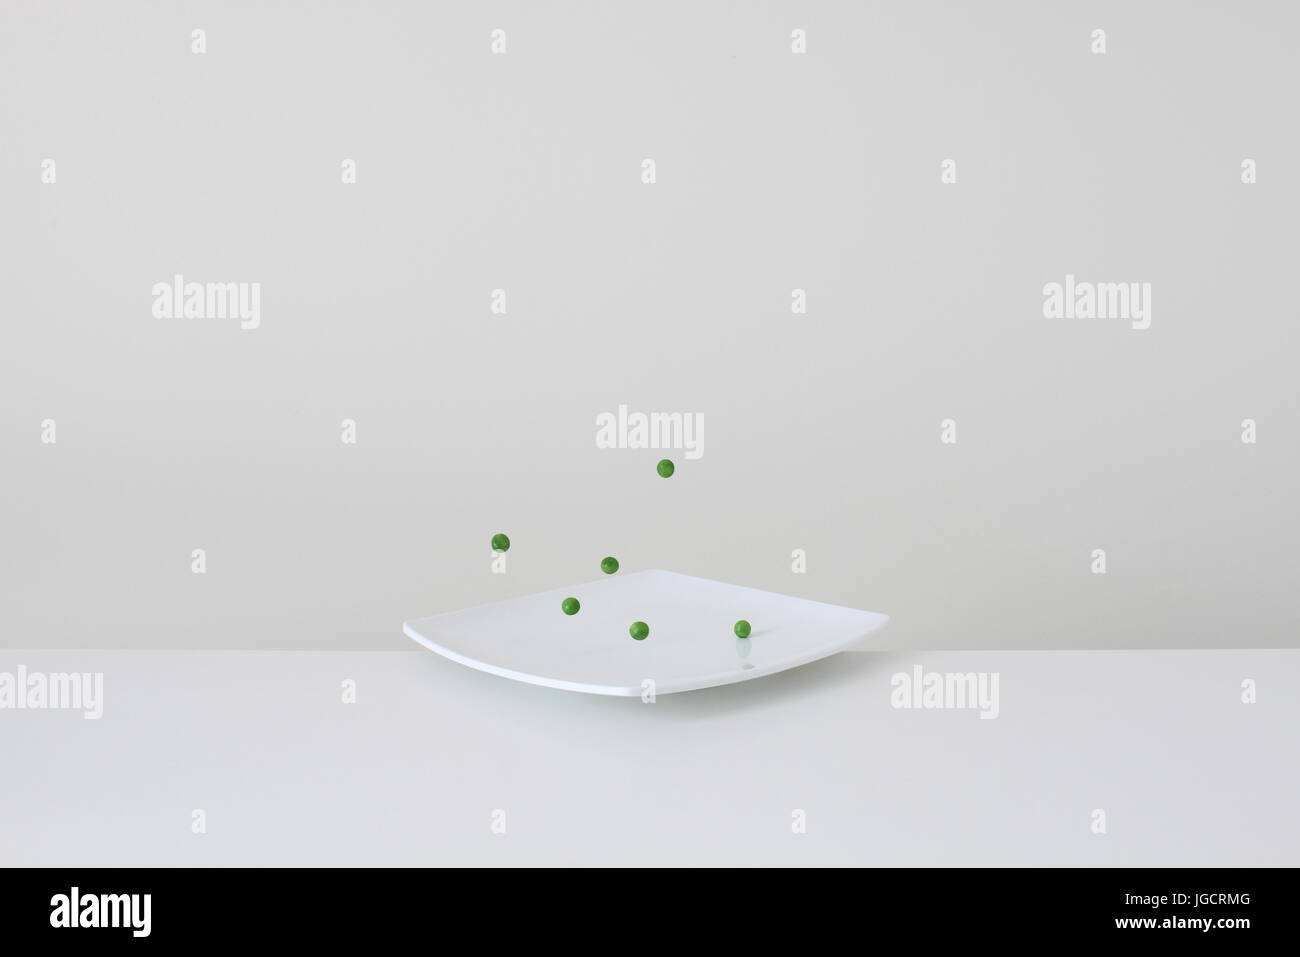 Conceptual green peas bouncing on plate Stock Photo